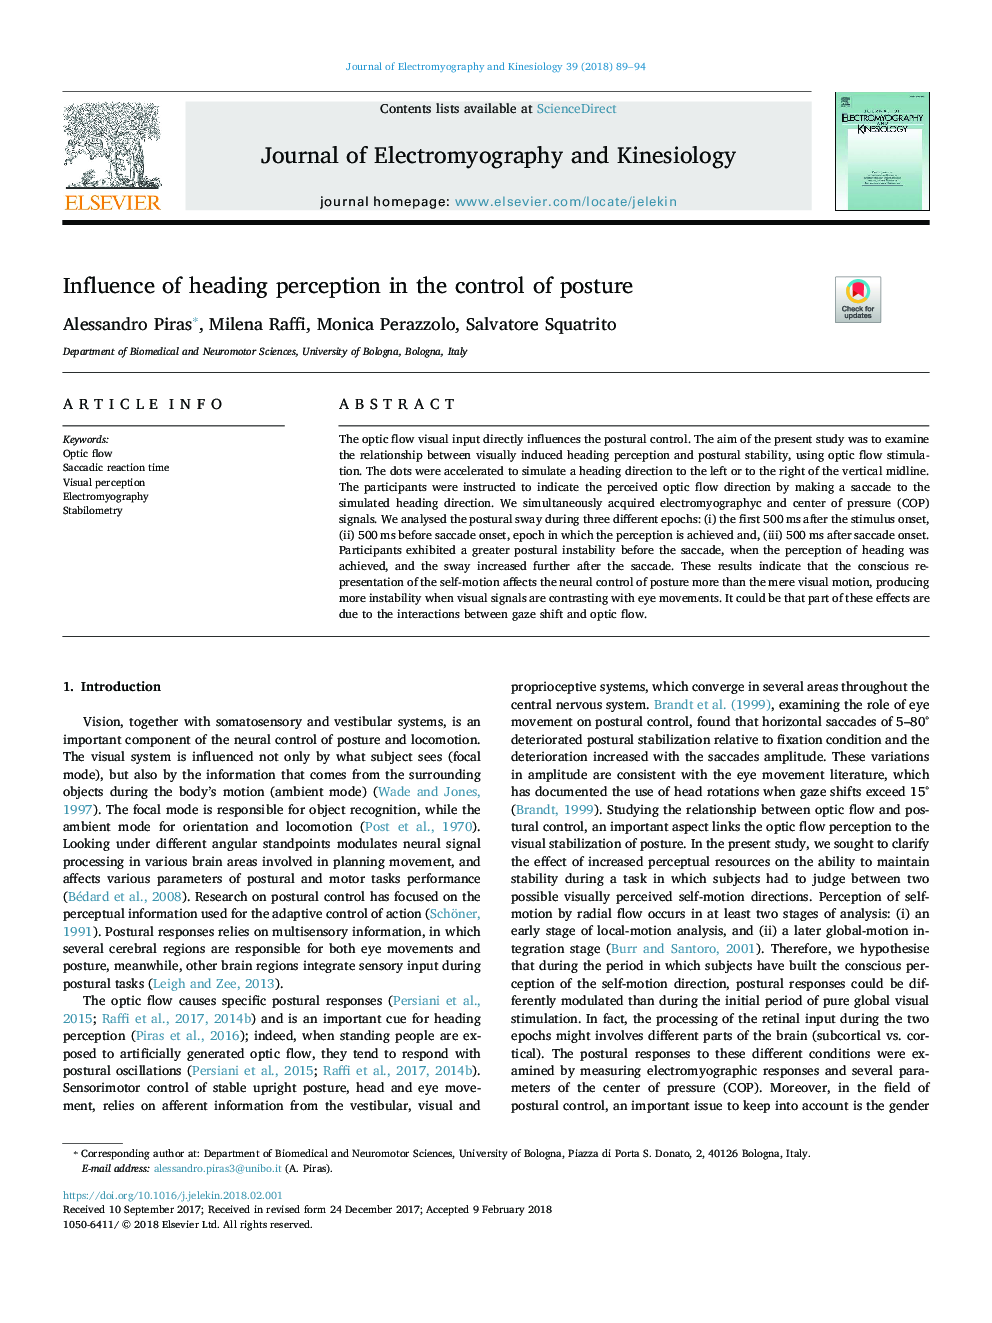 Influence of heading perception in the control of posture